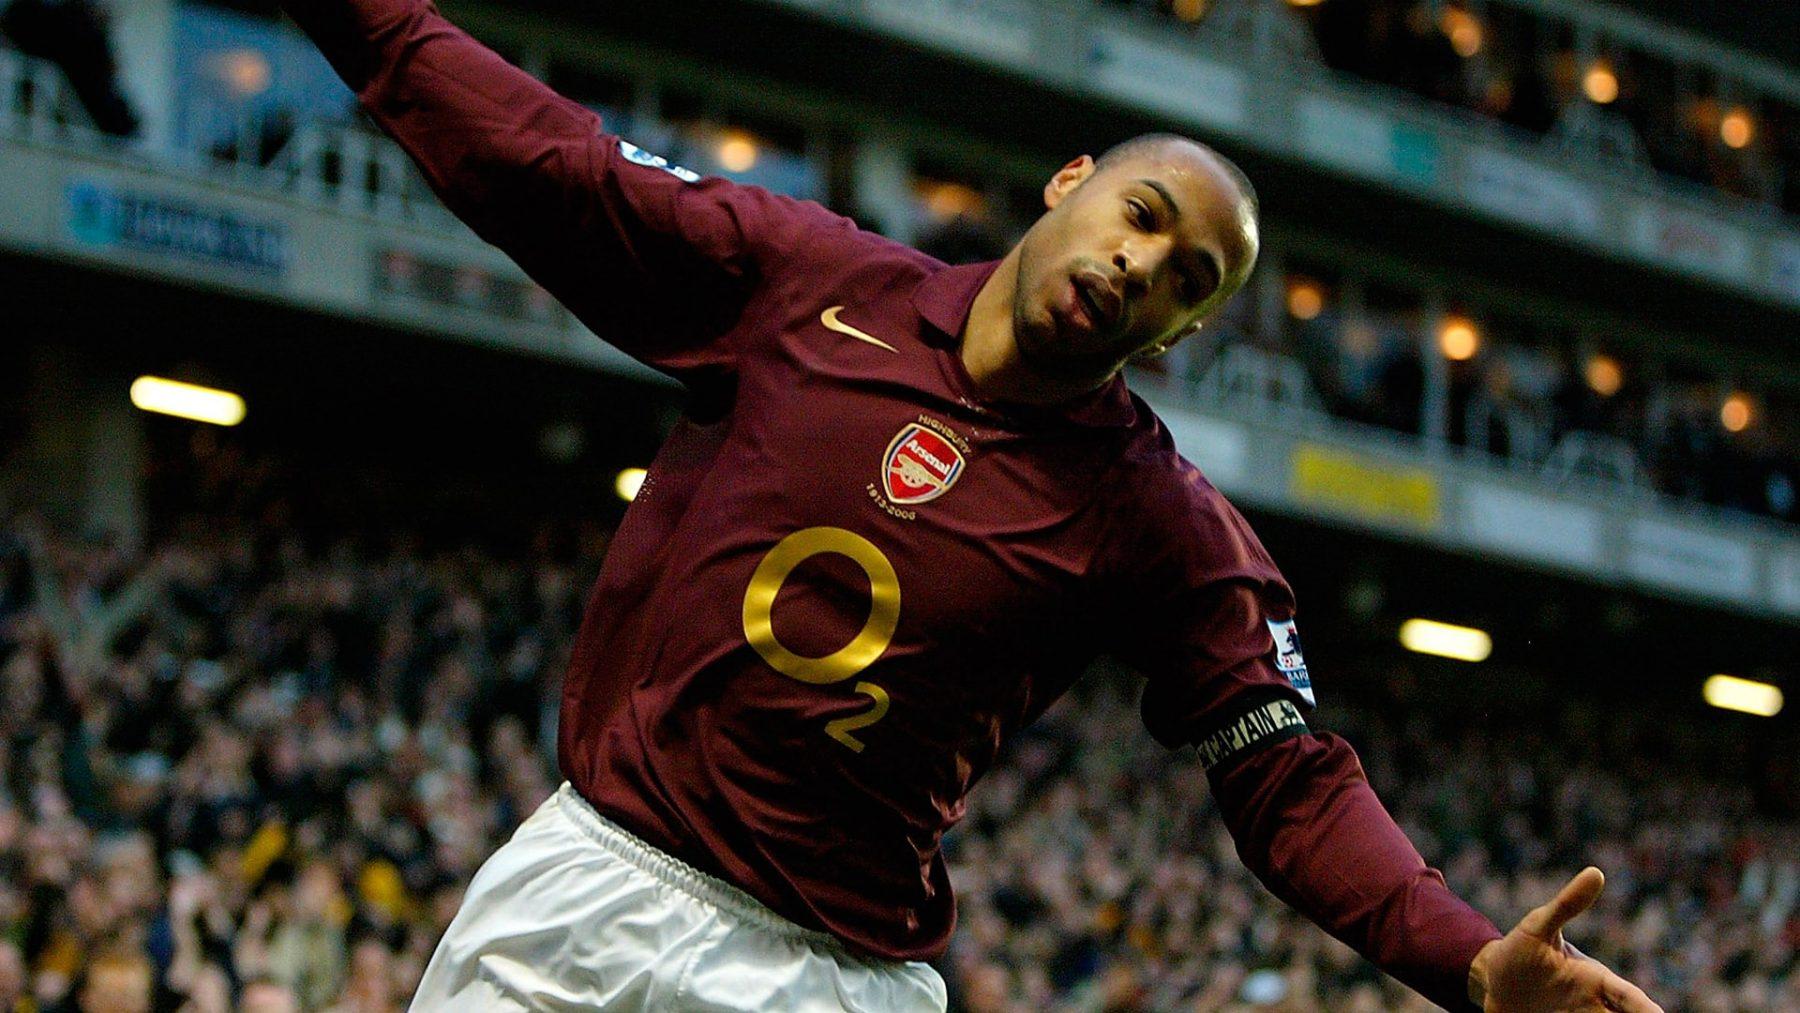 Thierry Henry Arsenal HD Wallpaper - WallpaperFX